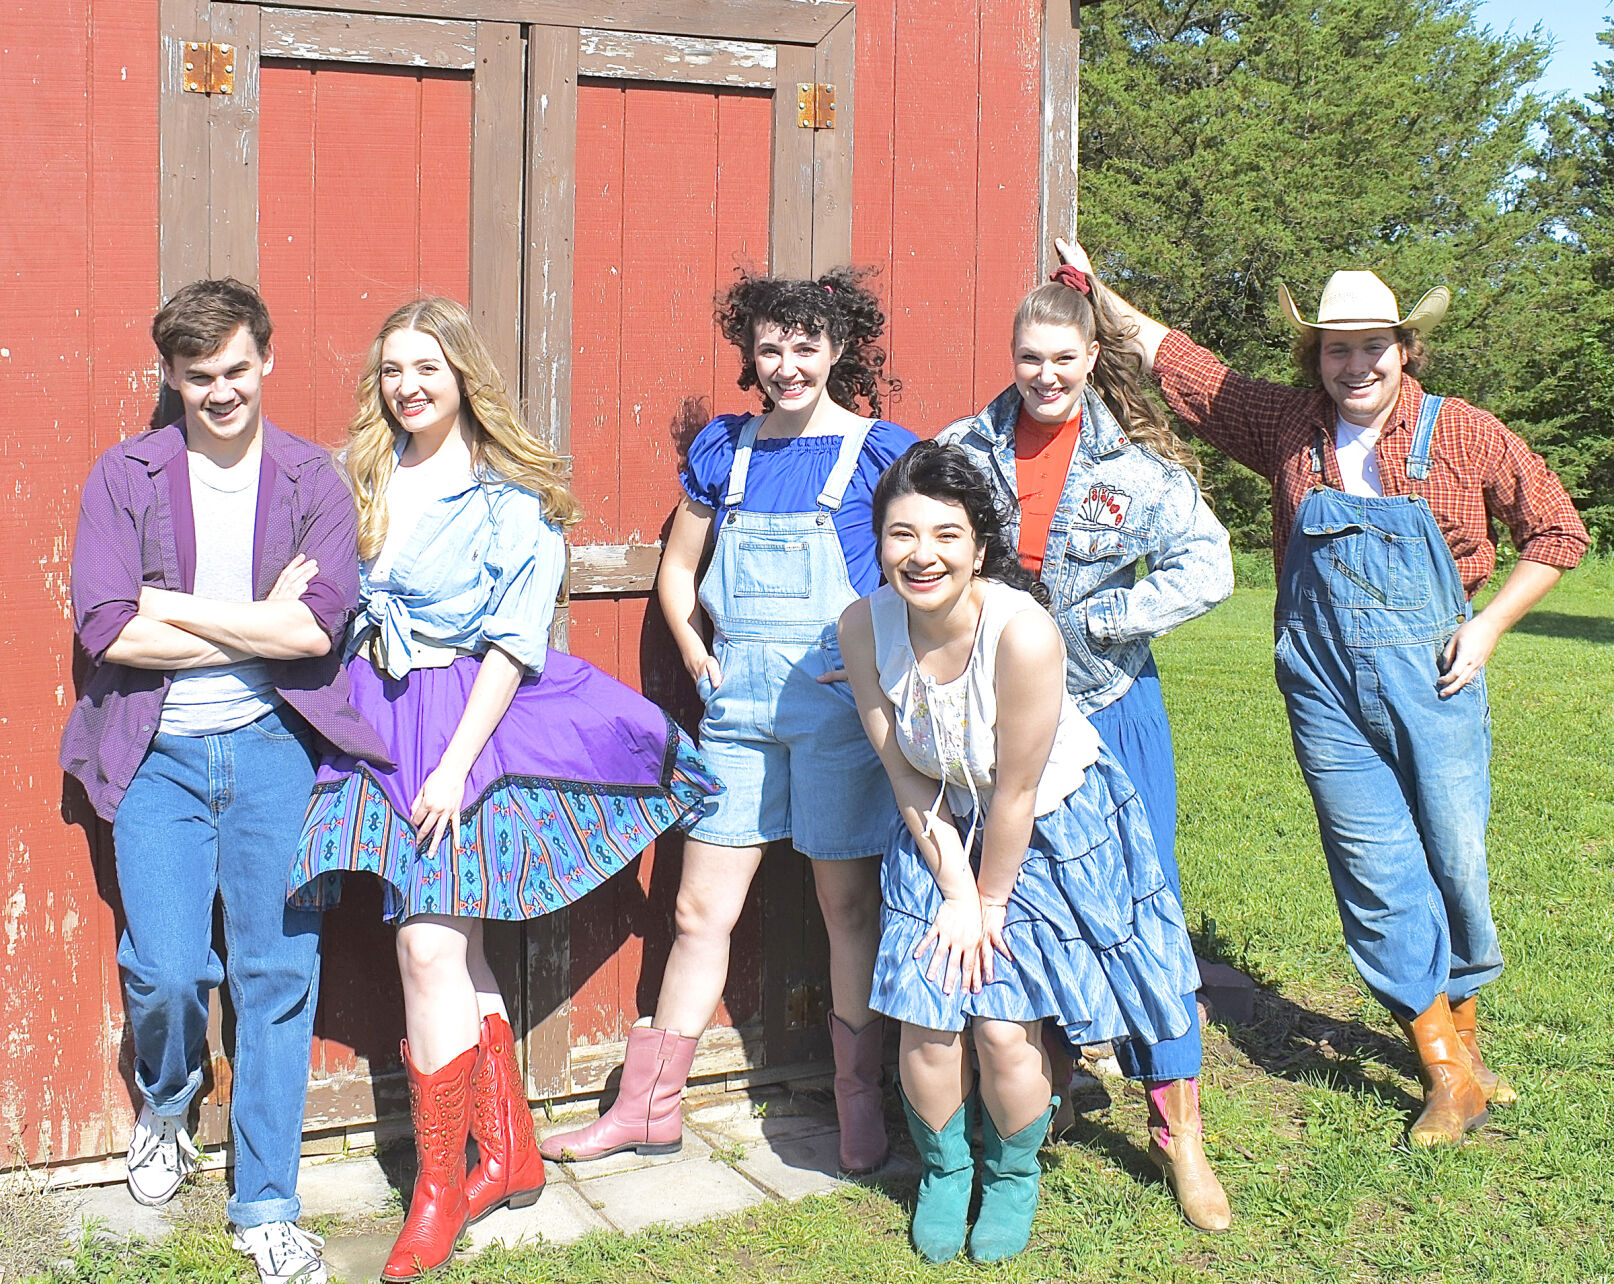 Footloose' coming to Great Plains Theatre for next two weekends